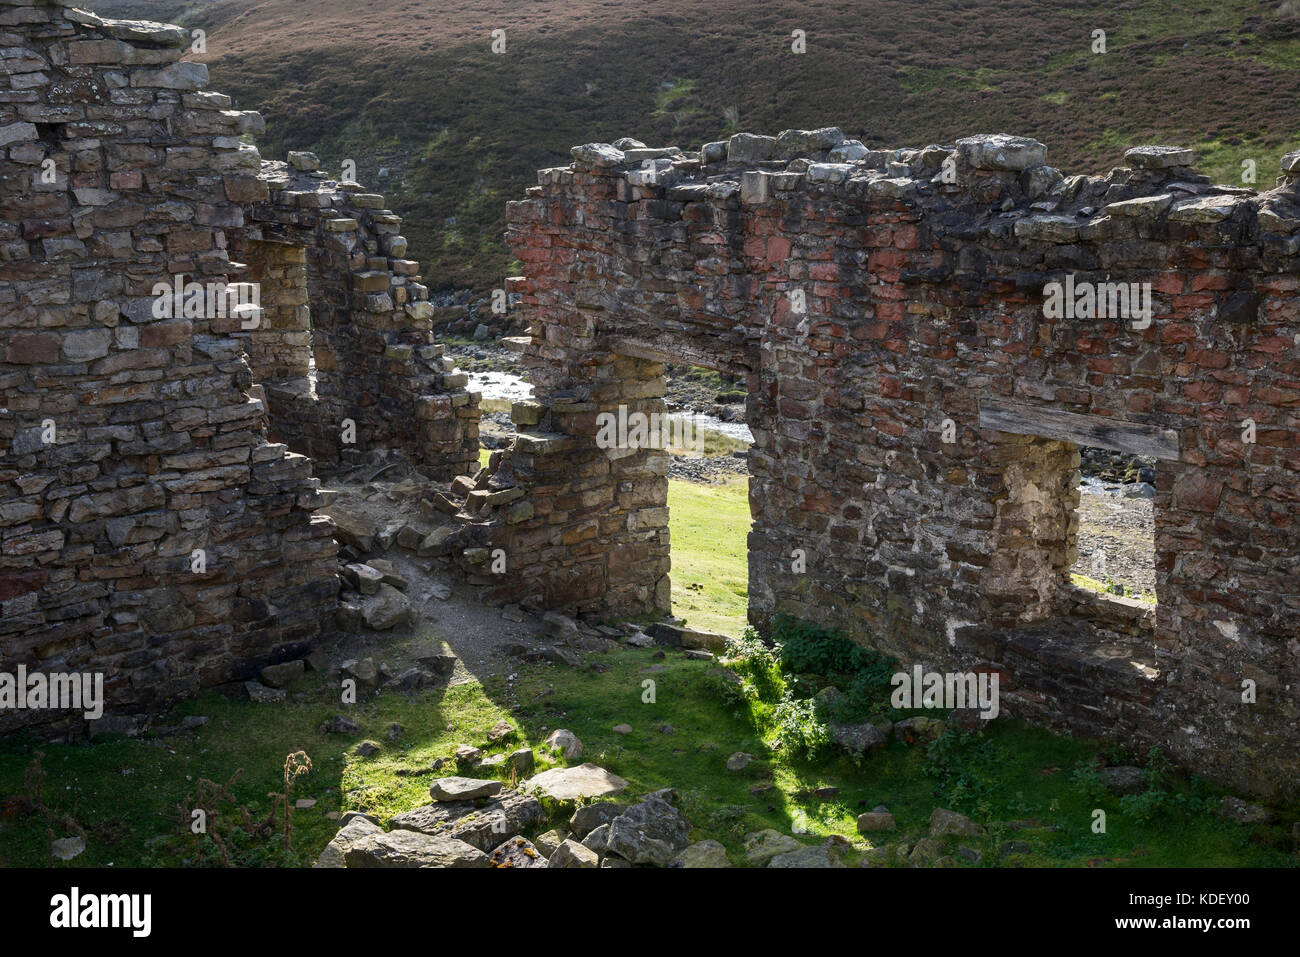 Ruins of Surrender Lead Smelting mill in the hills above Reeth, Swaledale in North Yorkshire, England. Stock Photo